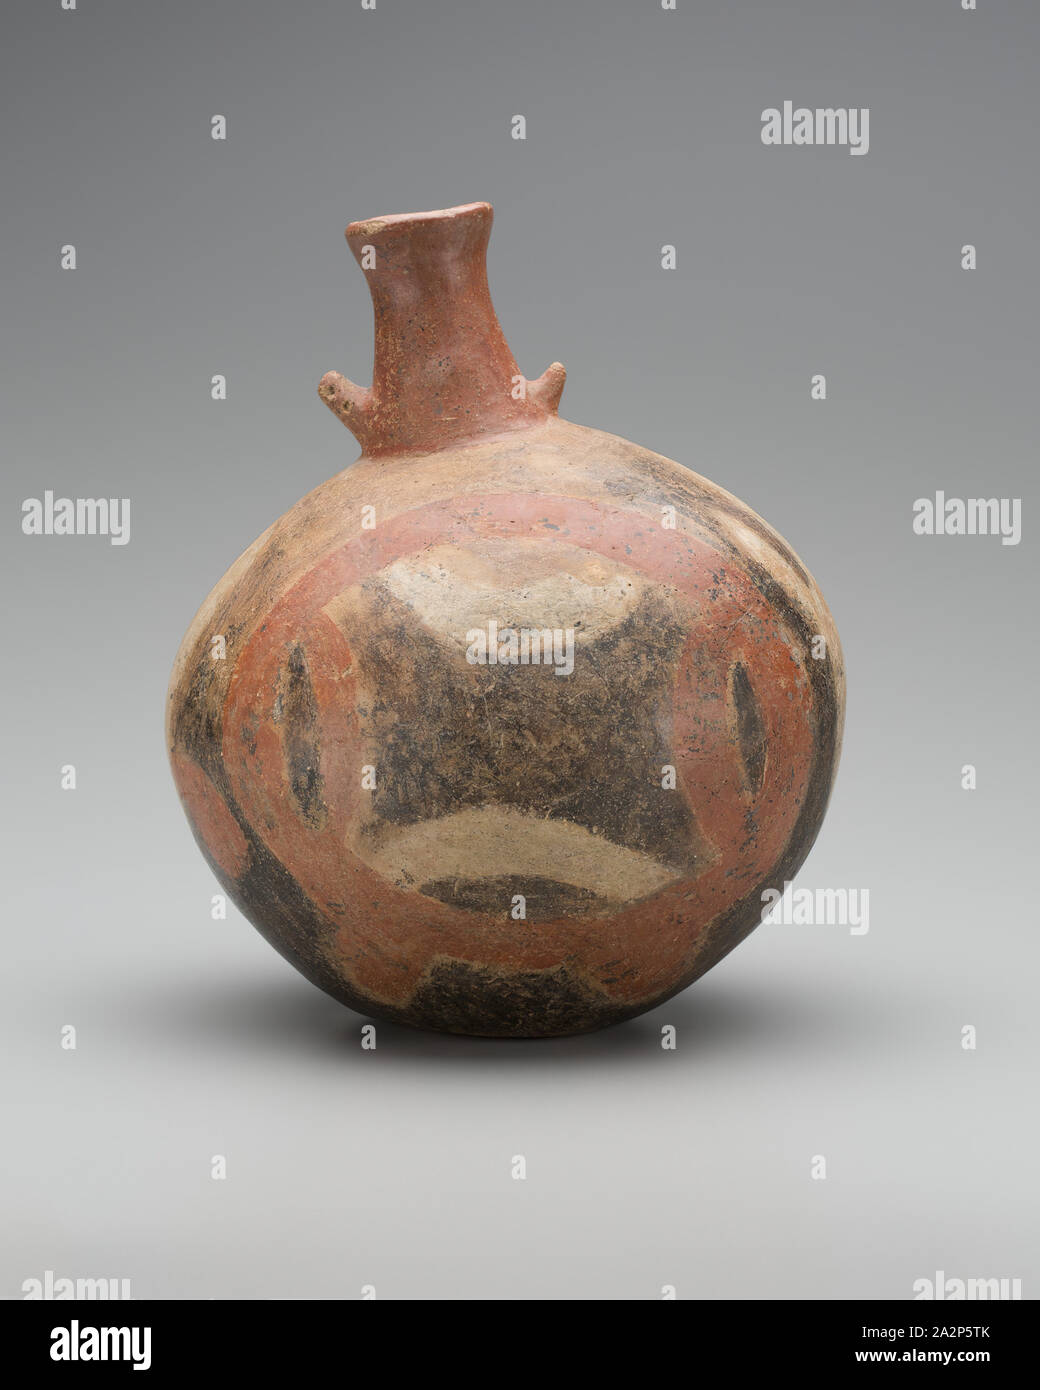 Quapaw, Native American, Bottle, between 1650 and 1750, fired clay, red, white and black slip pigment Stock Photo